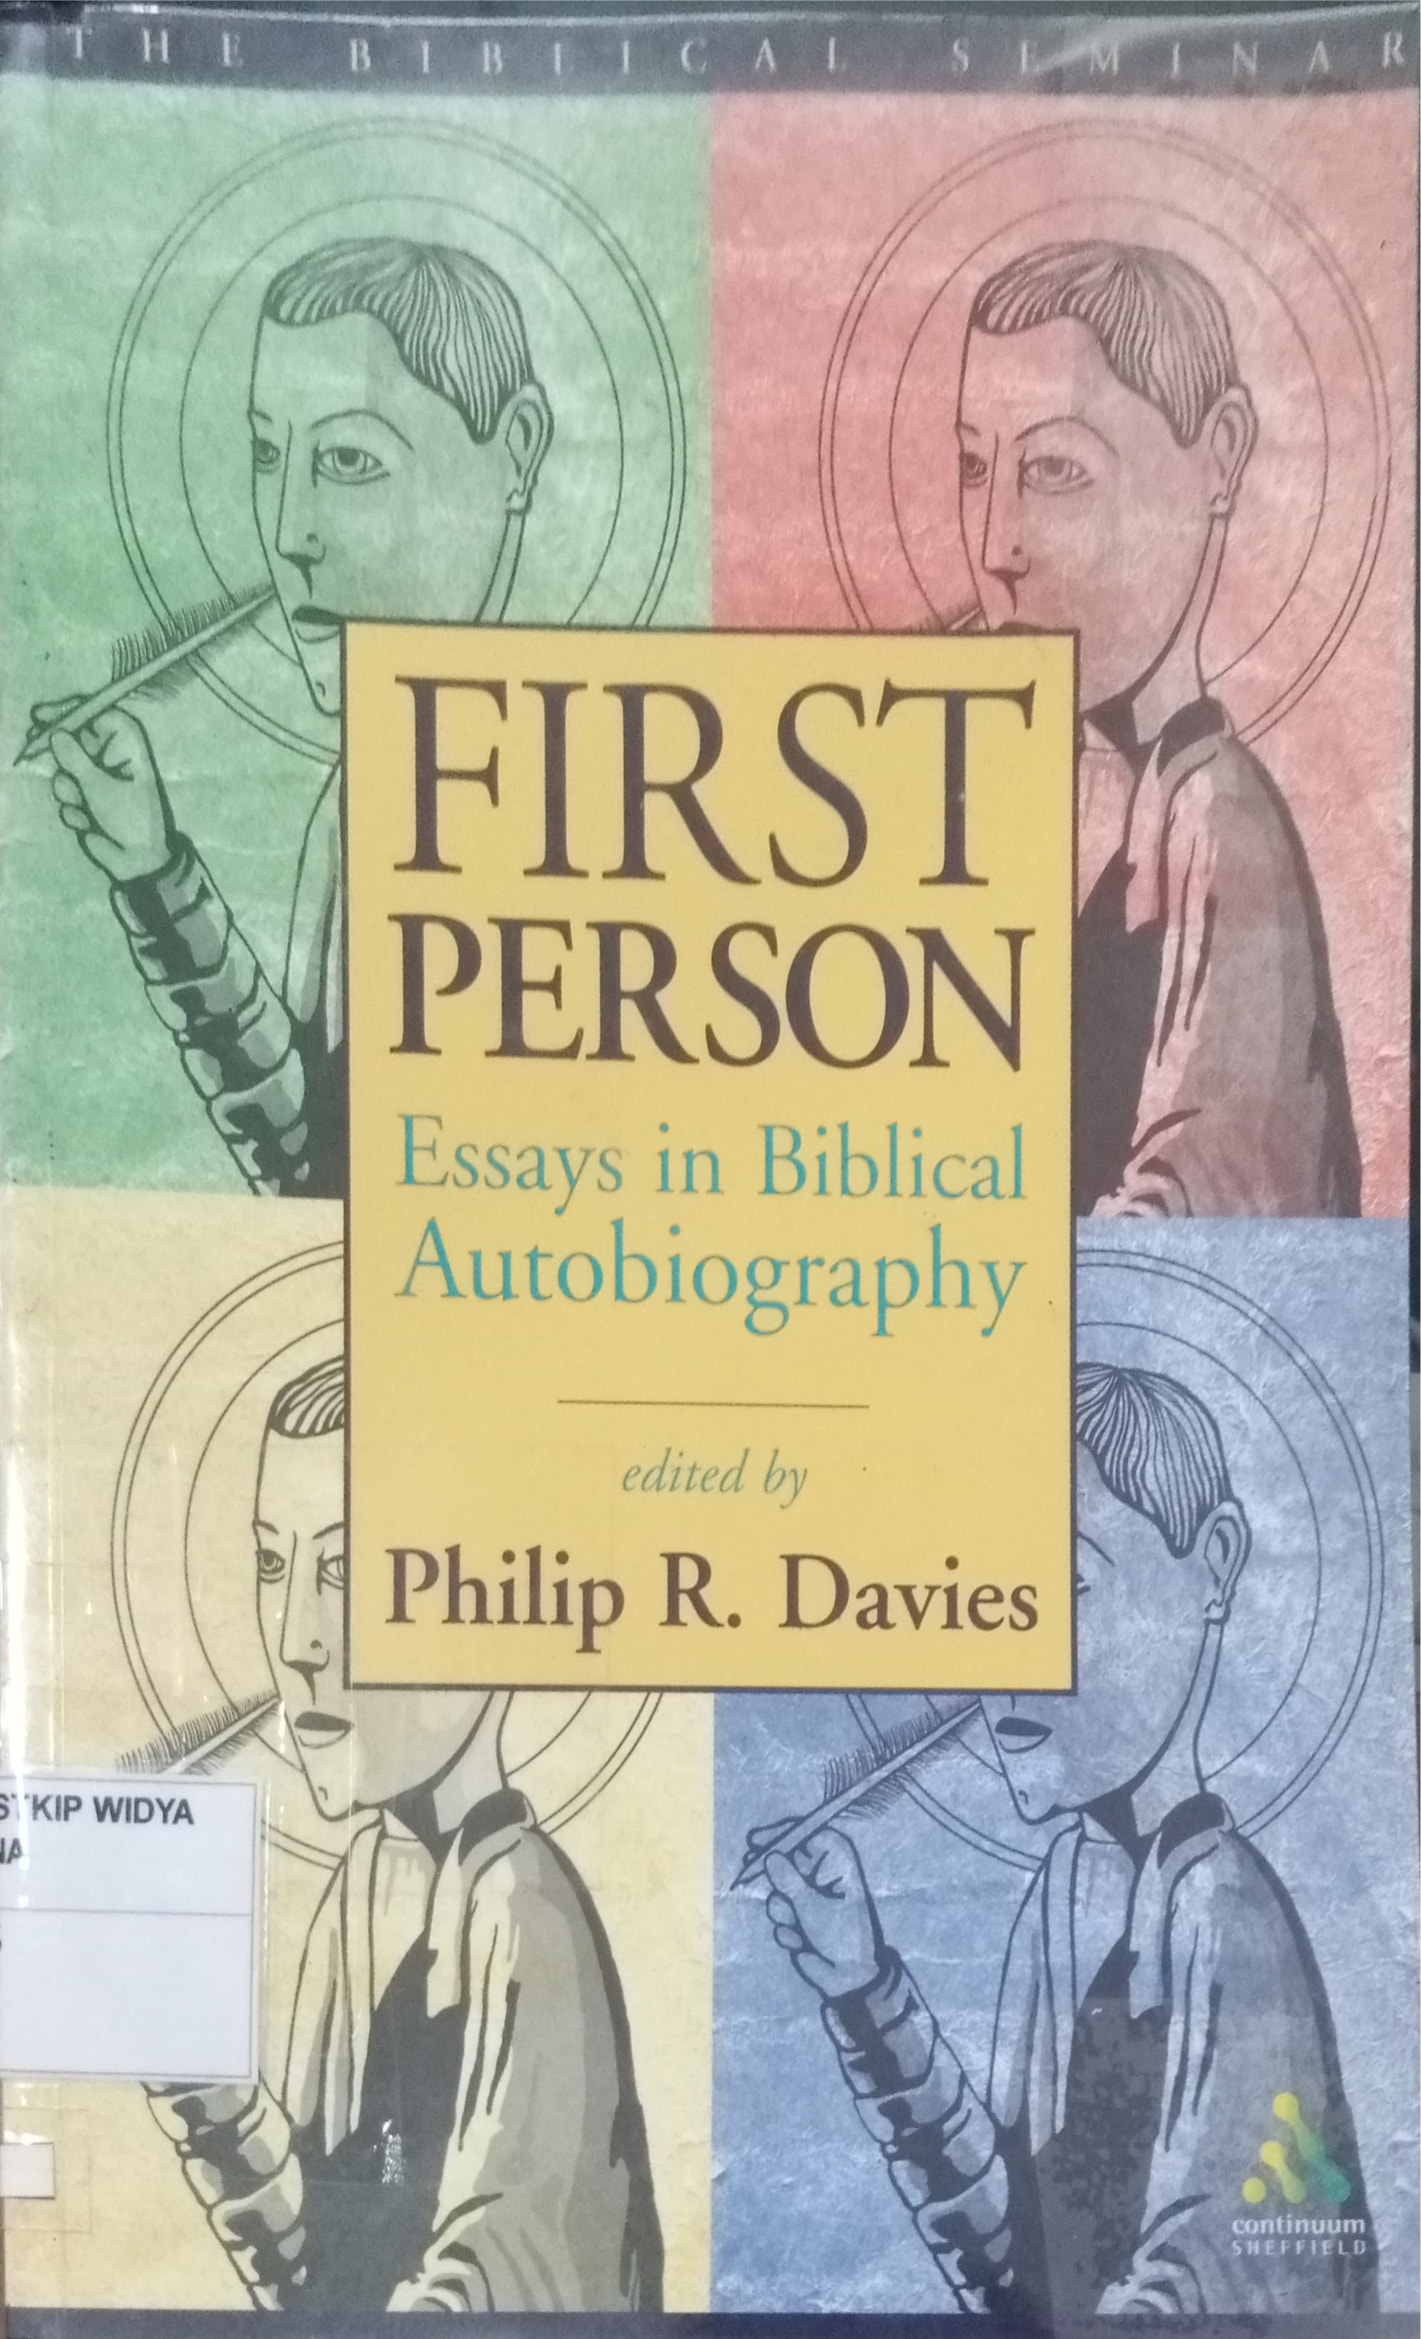 First Person: Essays in Biblical Autobiography